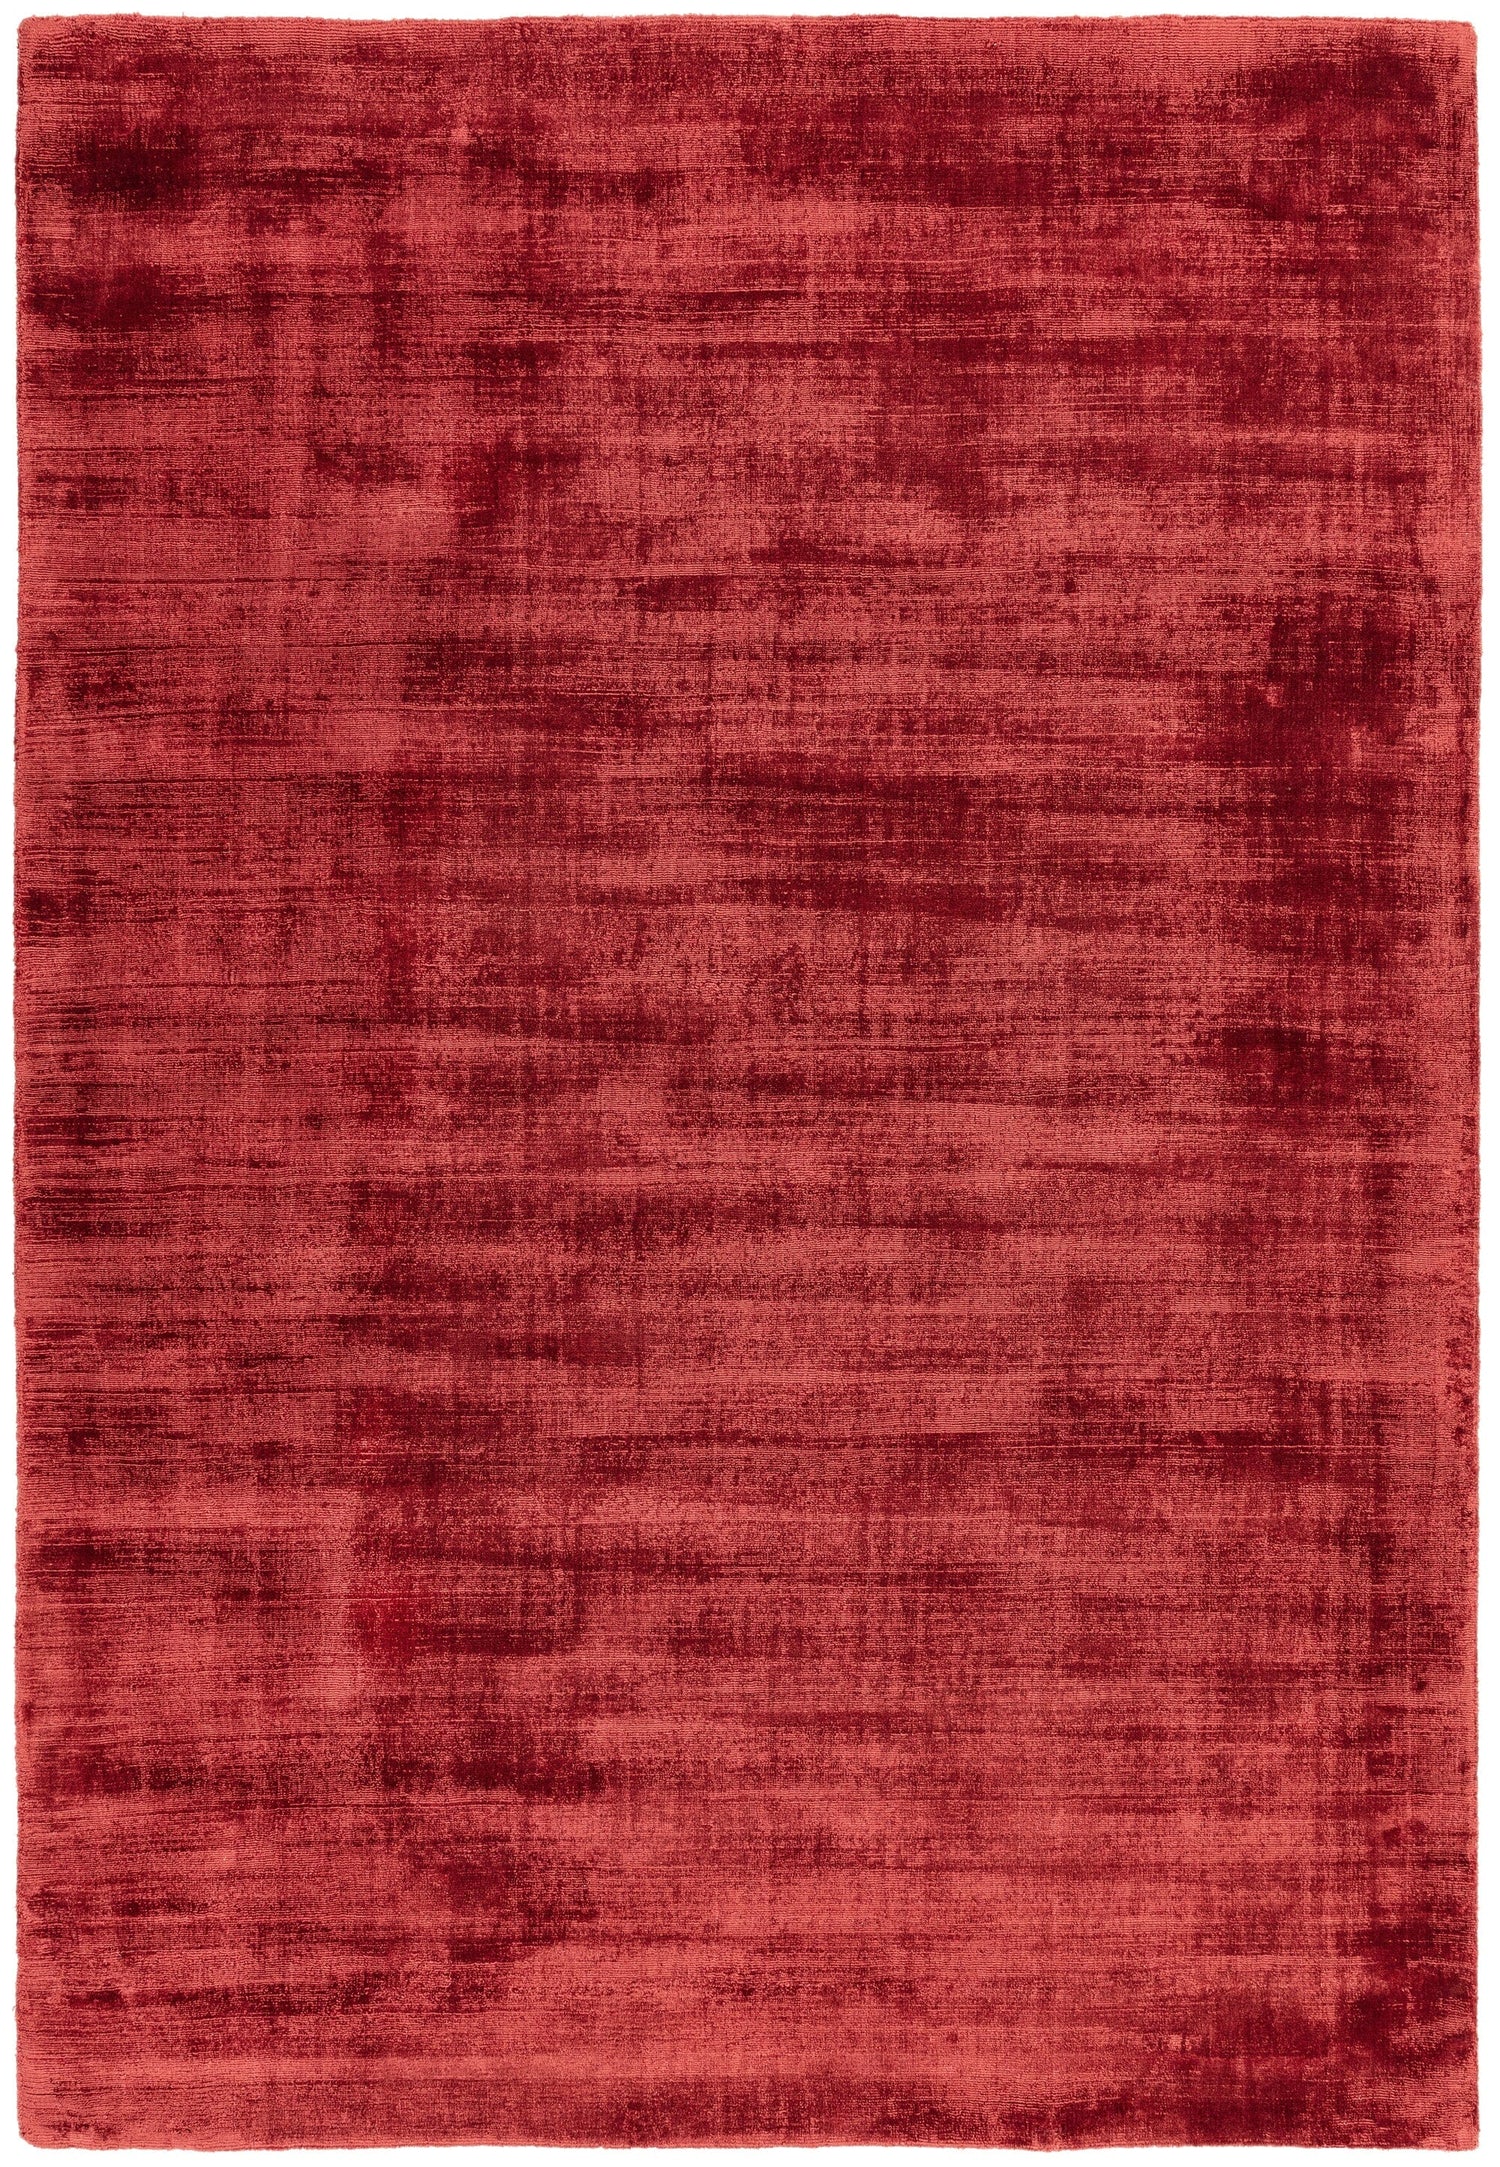  Asiatic Carpets-Asiatic Carpets Blade Hand Woven Runner Berry - 66 x 240cm-Red 509 